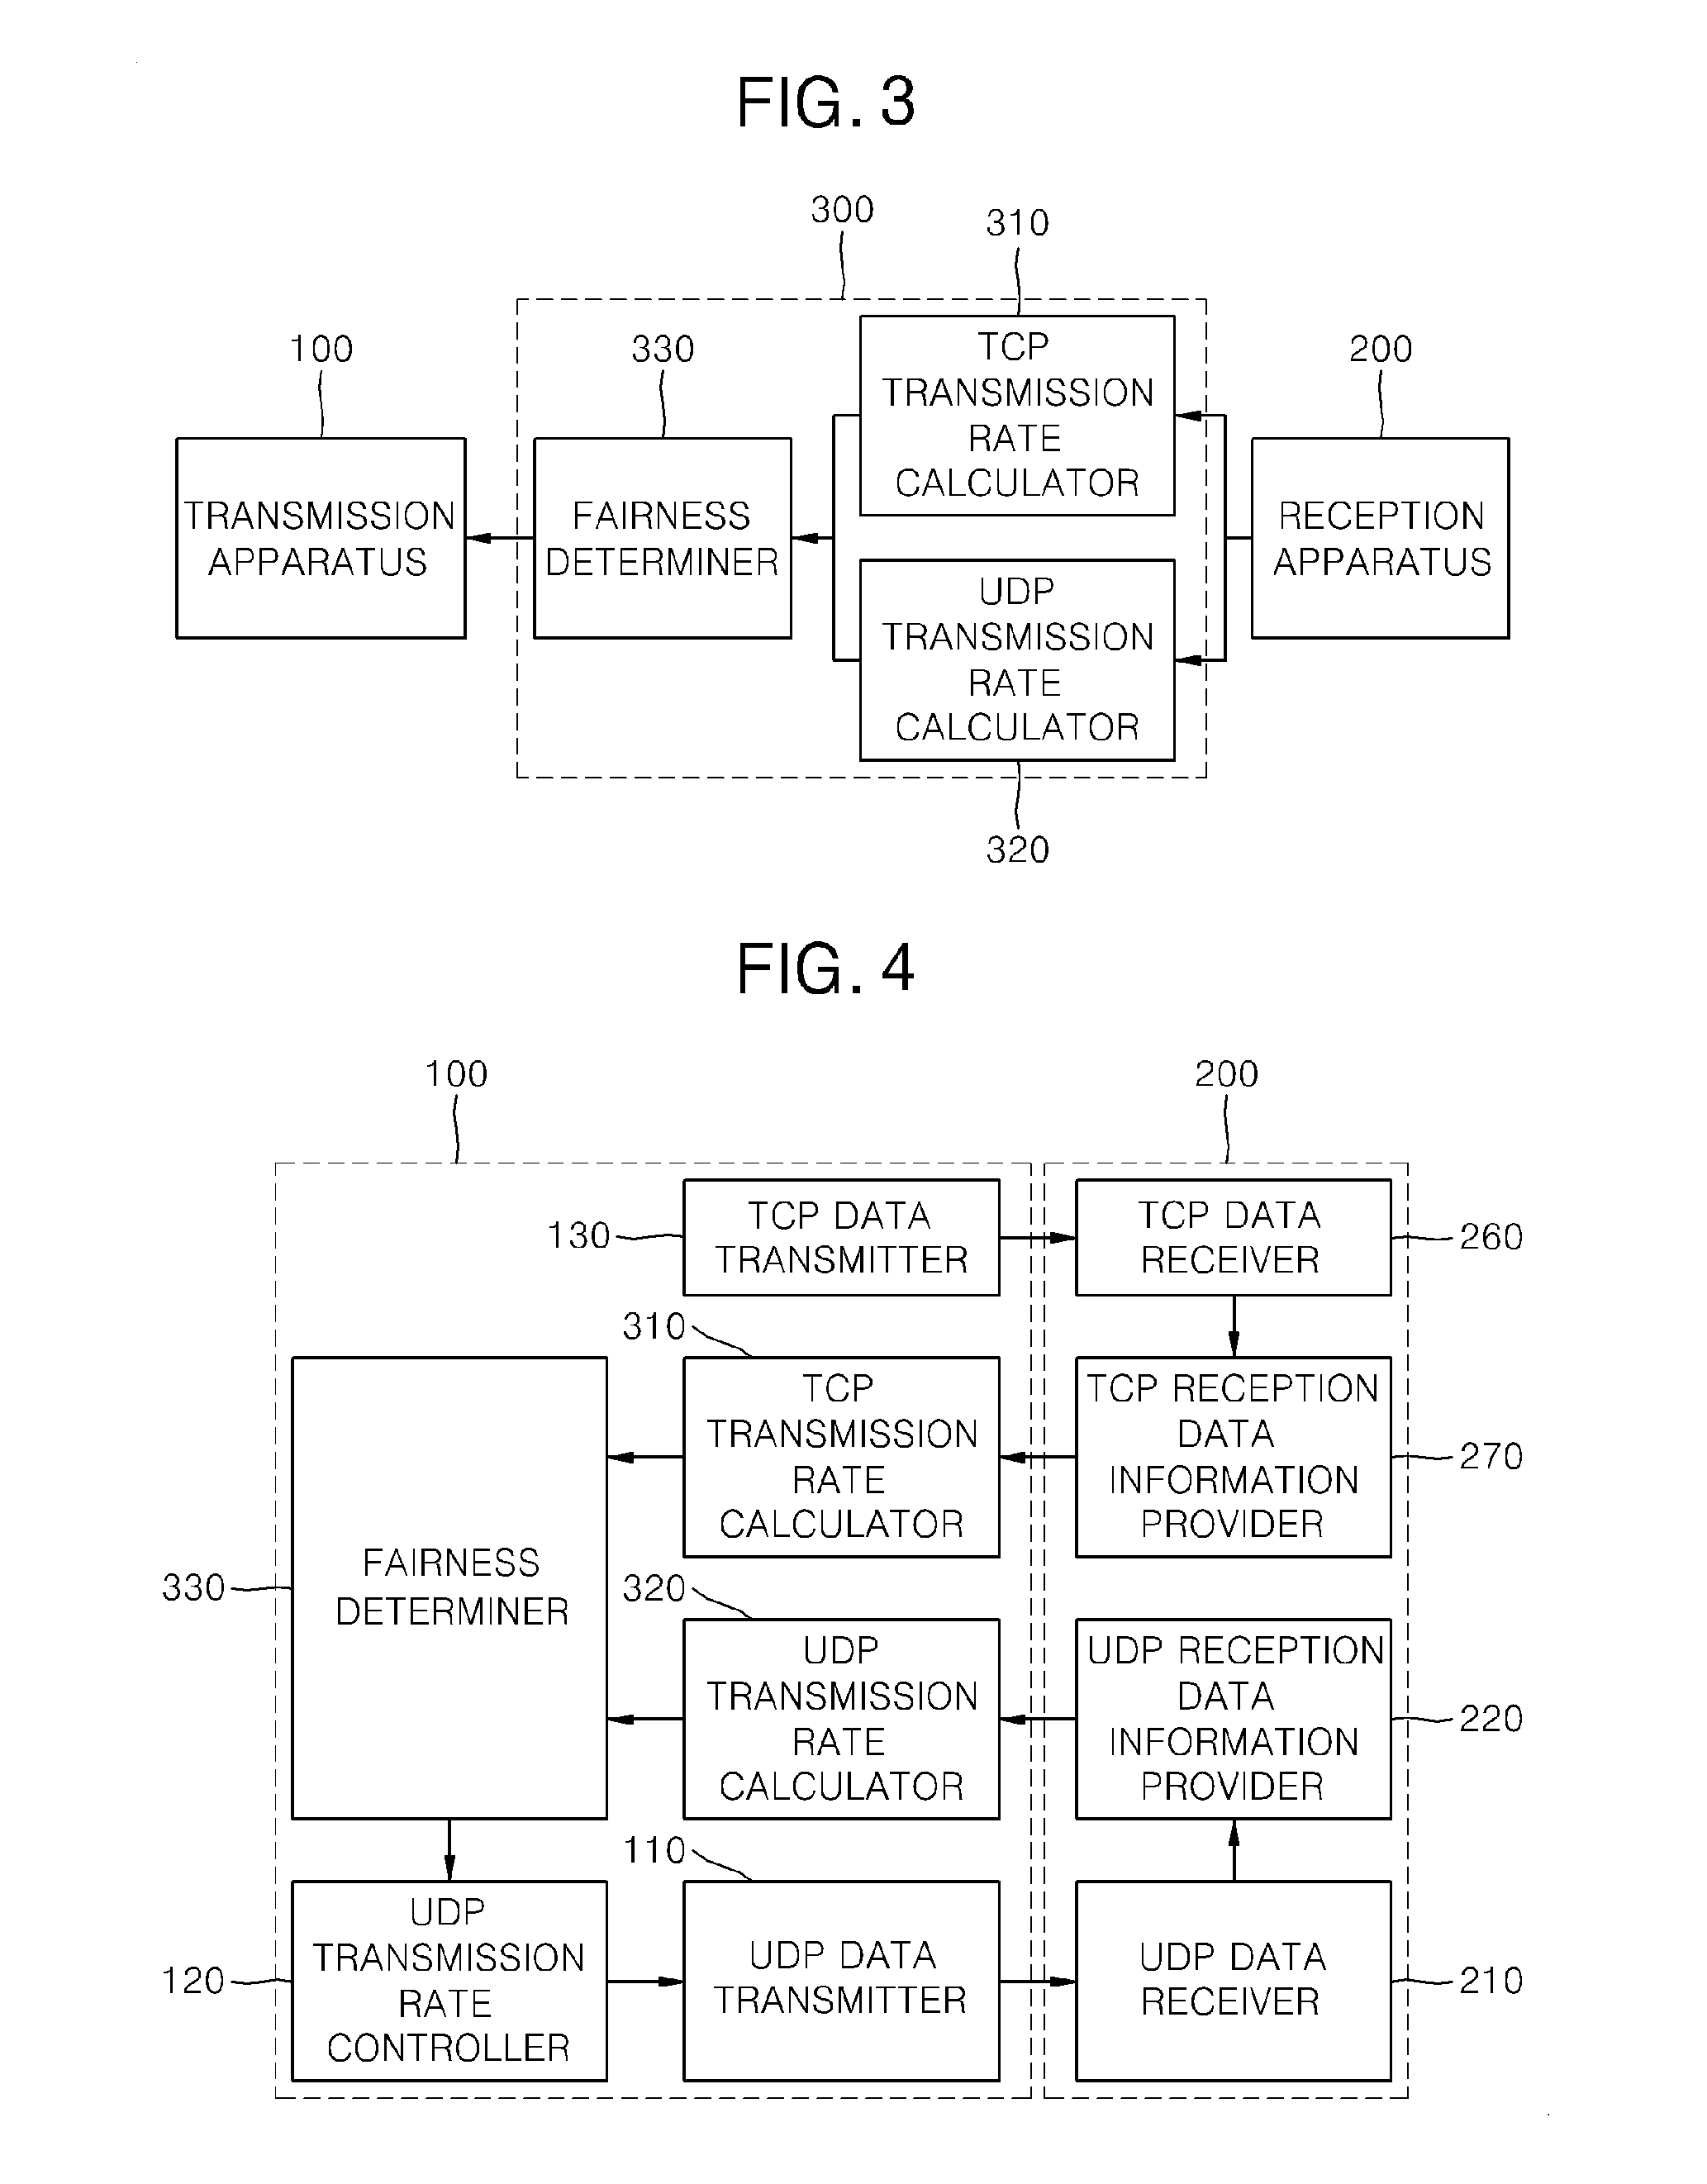 Apparatus and method for ensuring fairness of UDP data transmission in ethernet environment